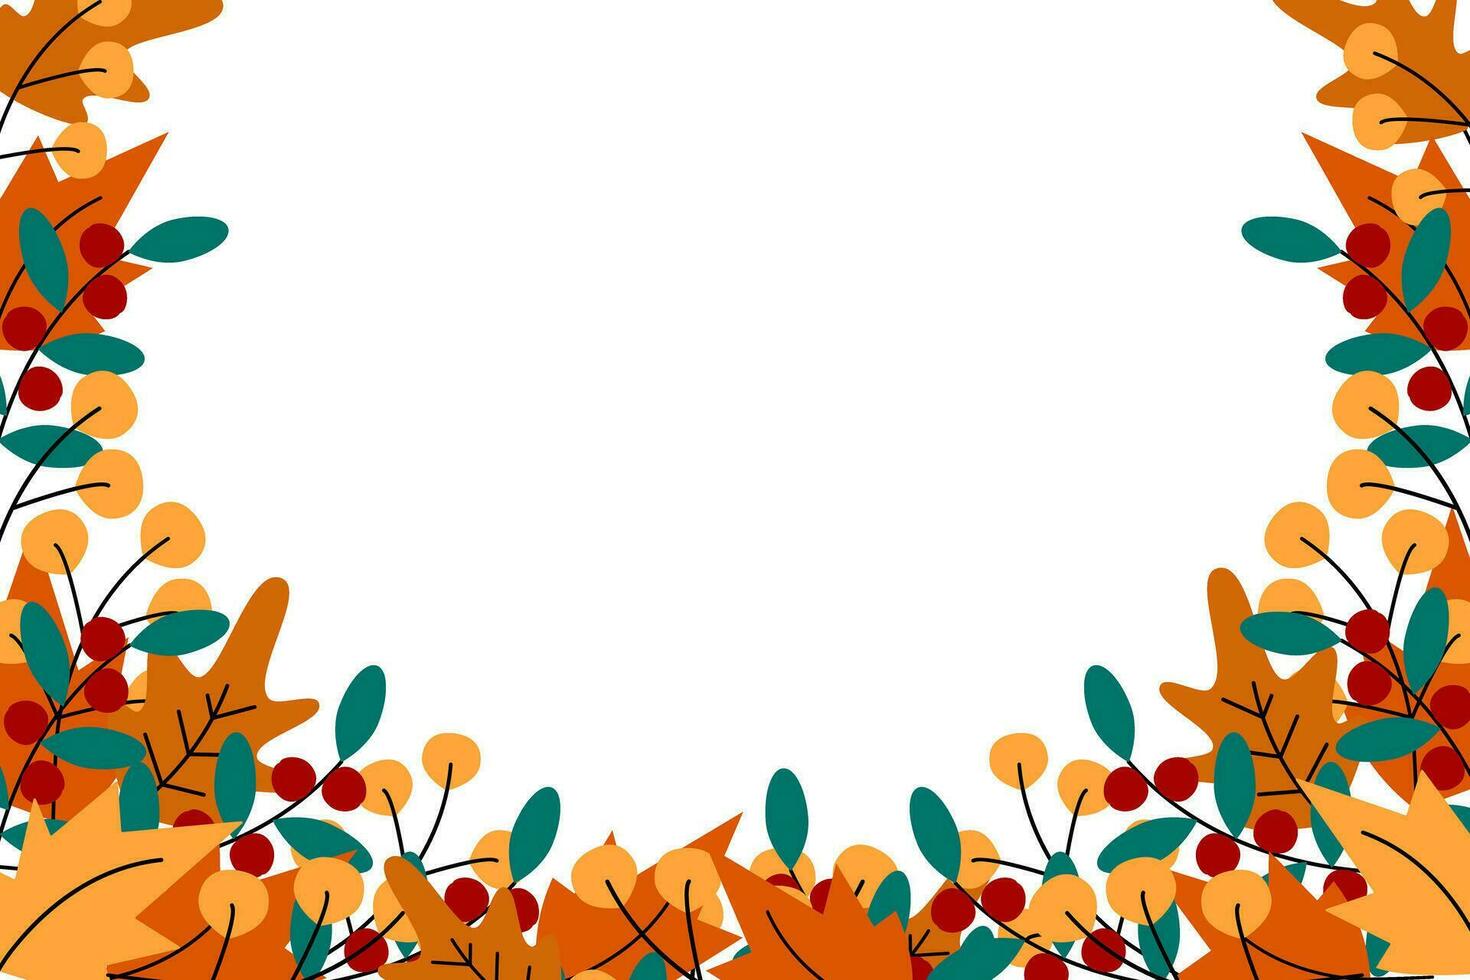 Abstract autumnal border frame with copy space inside and various twigs in trendy bright fall shades vector